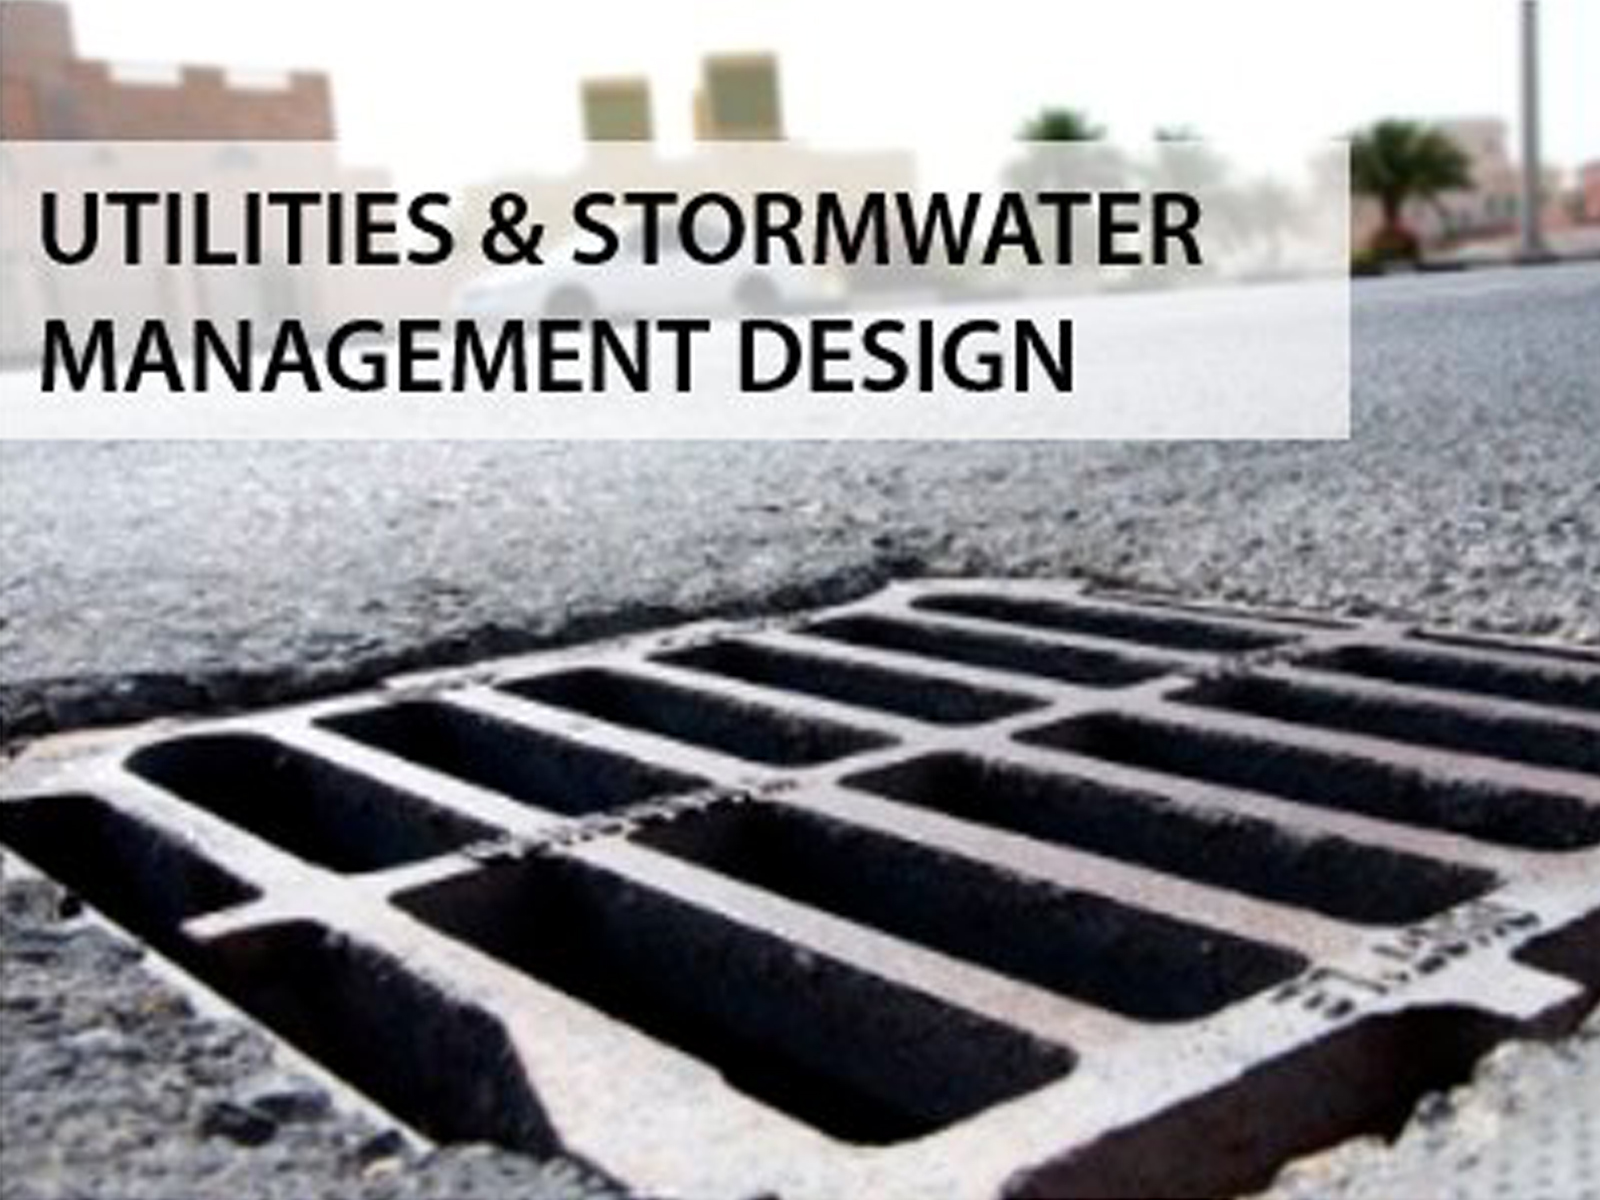 utilities and stormwater management design.